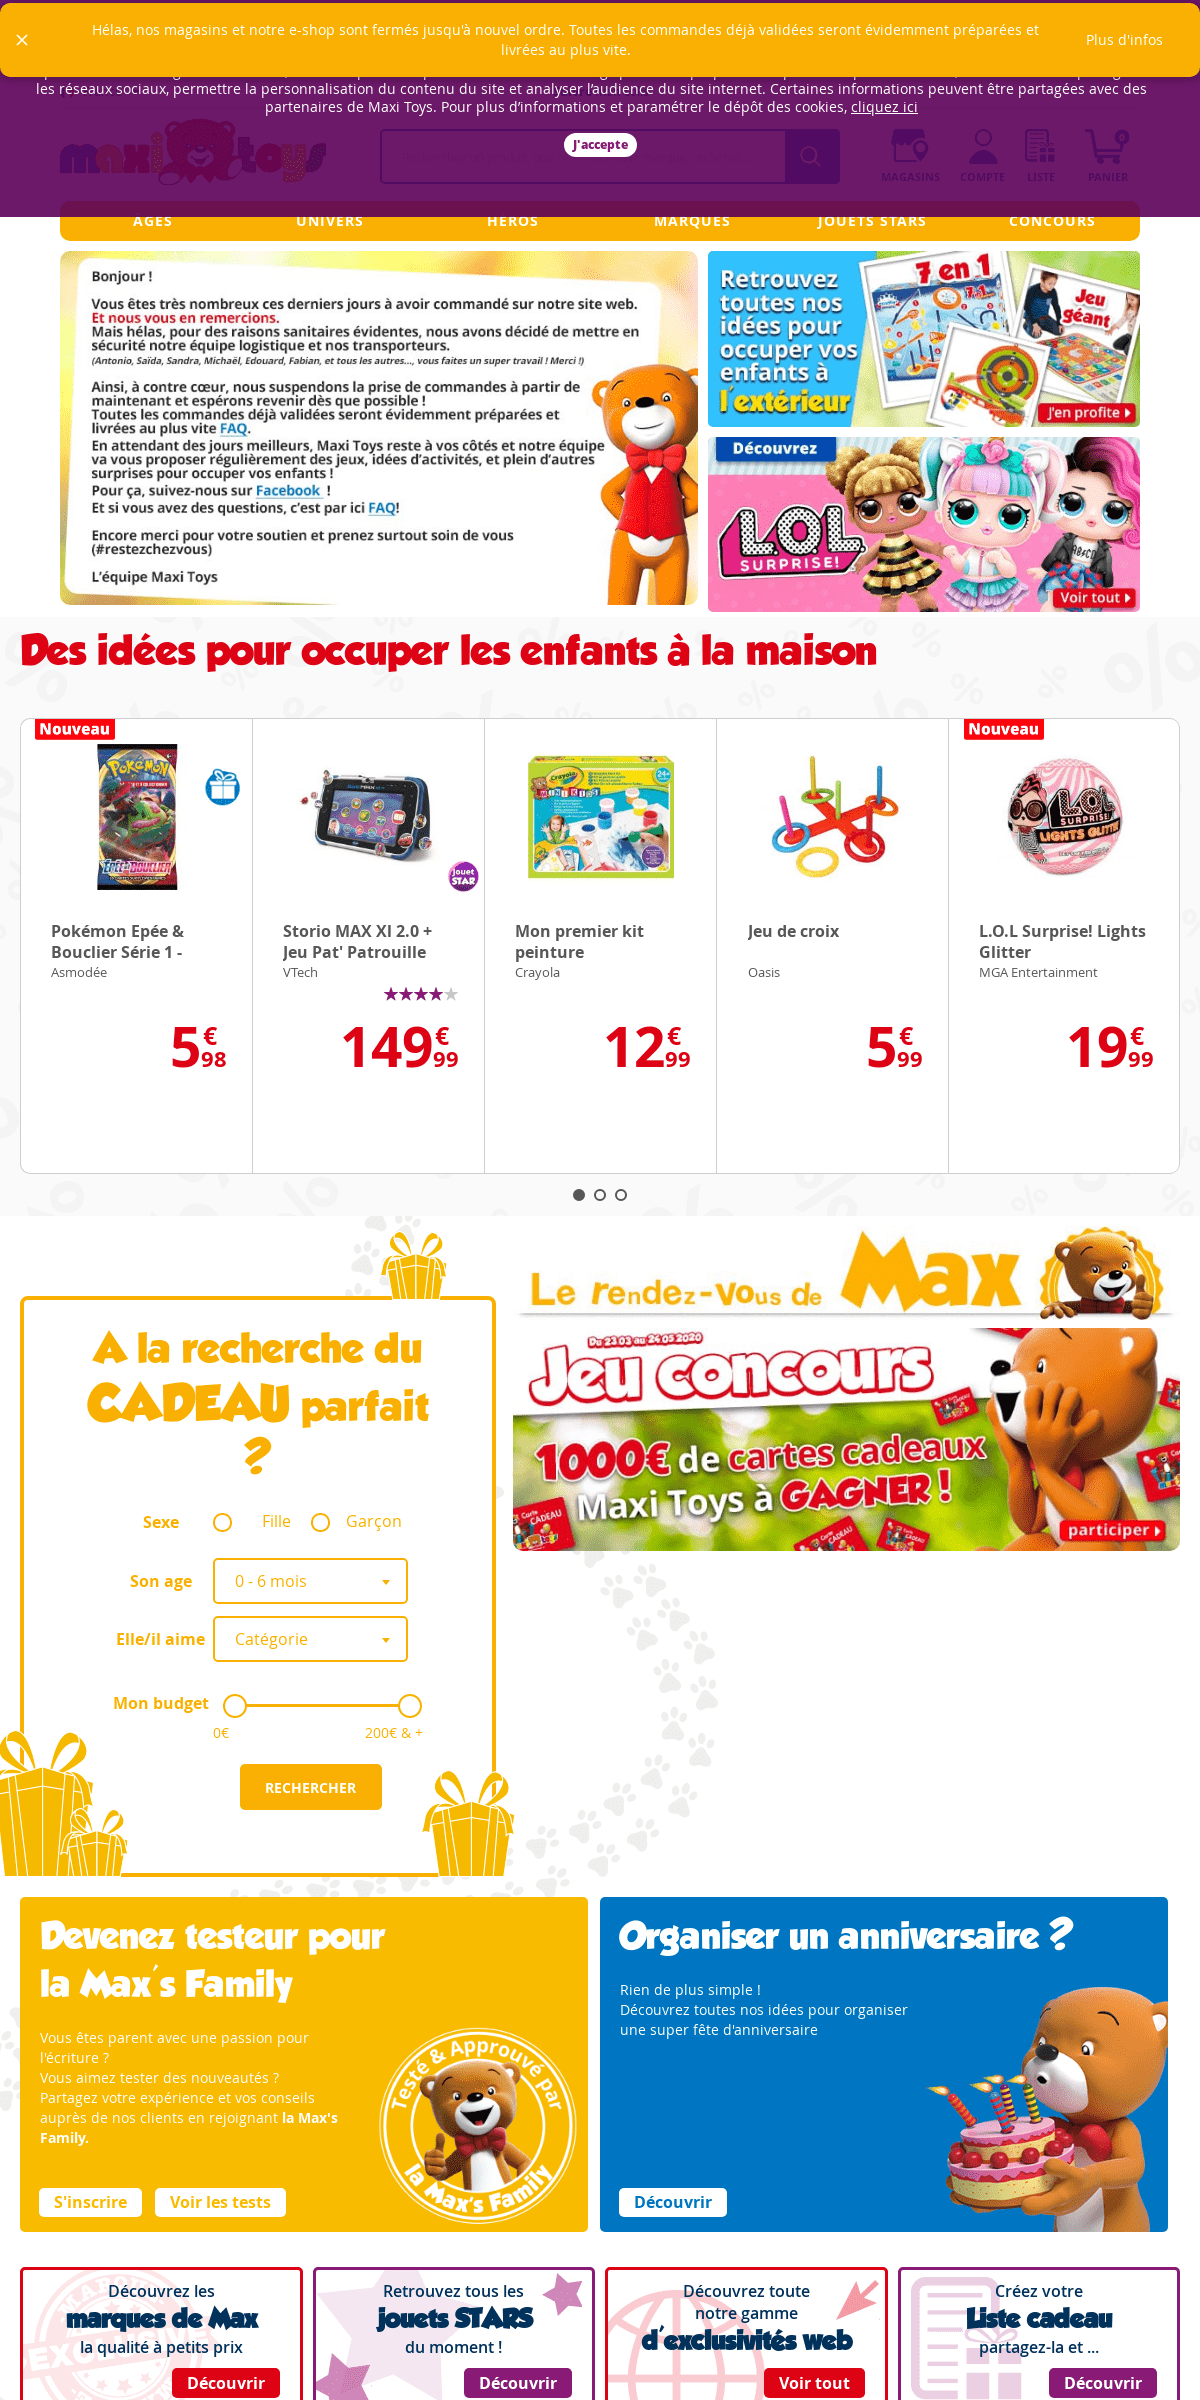 A complete backup of maxitoys.fr